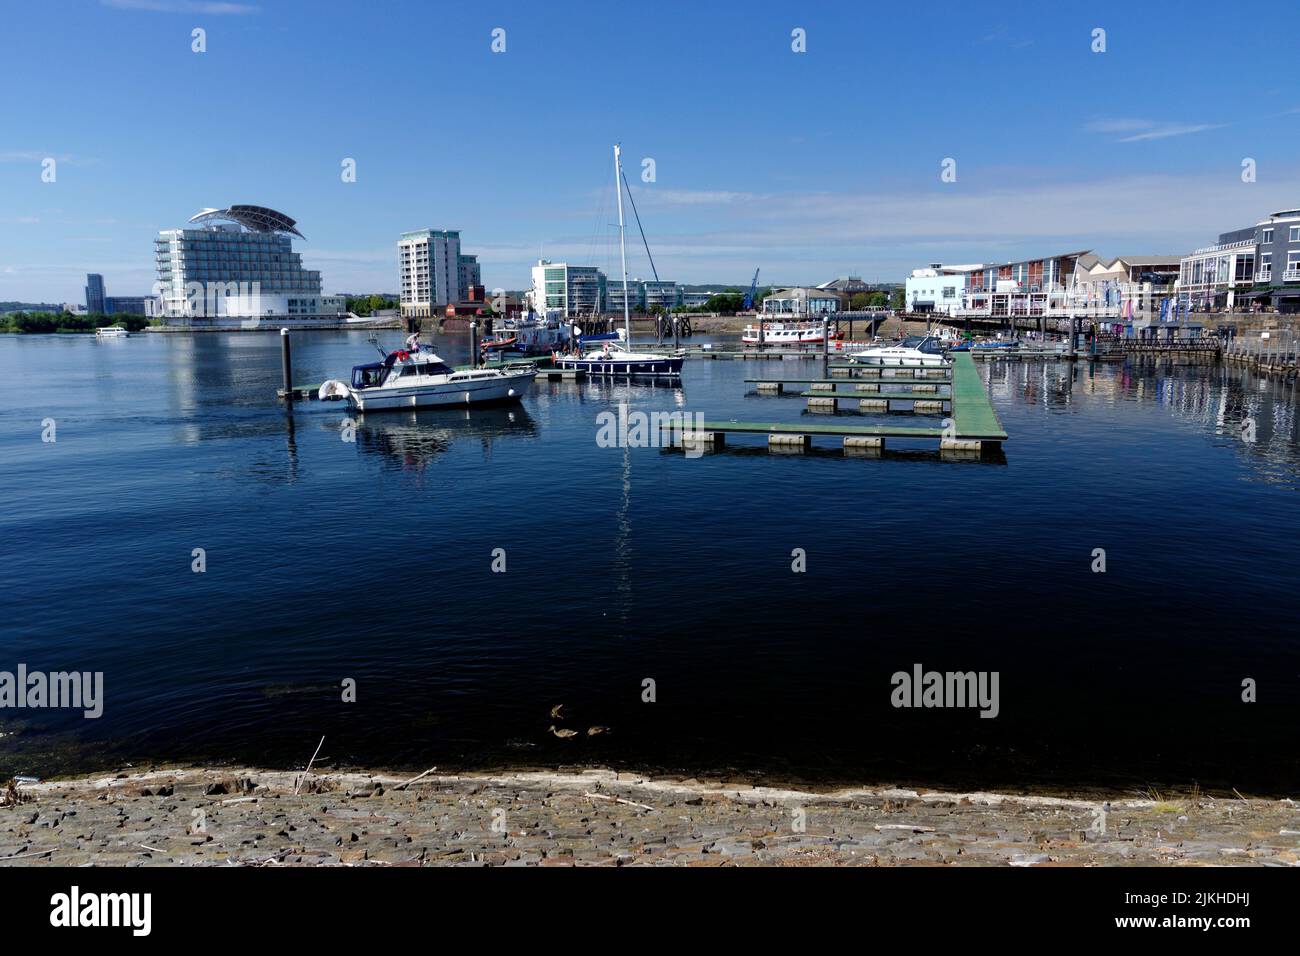 Boats Moored in Mermaid Quay, Cardiff Bay, Cardiff, Wales. Stock Photo